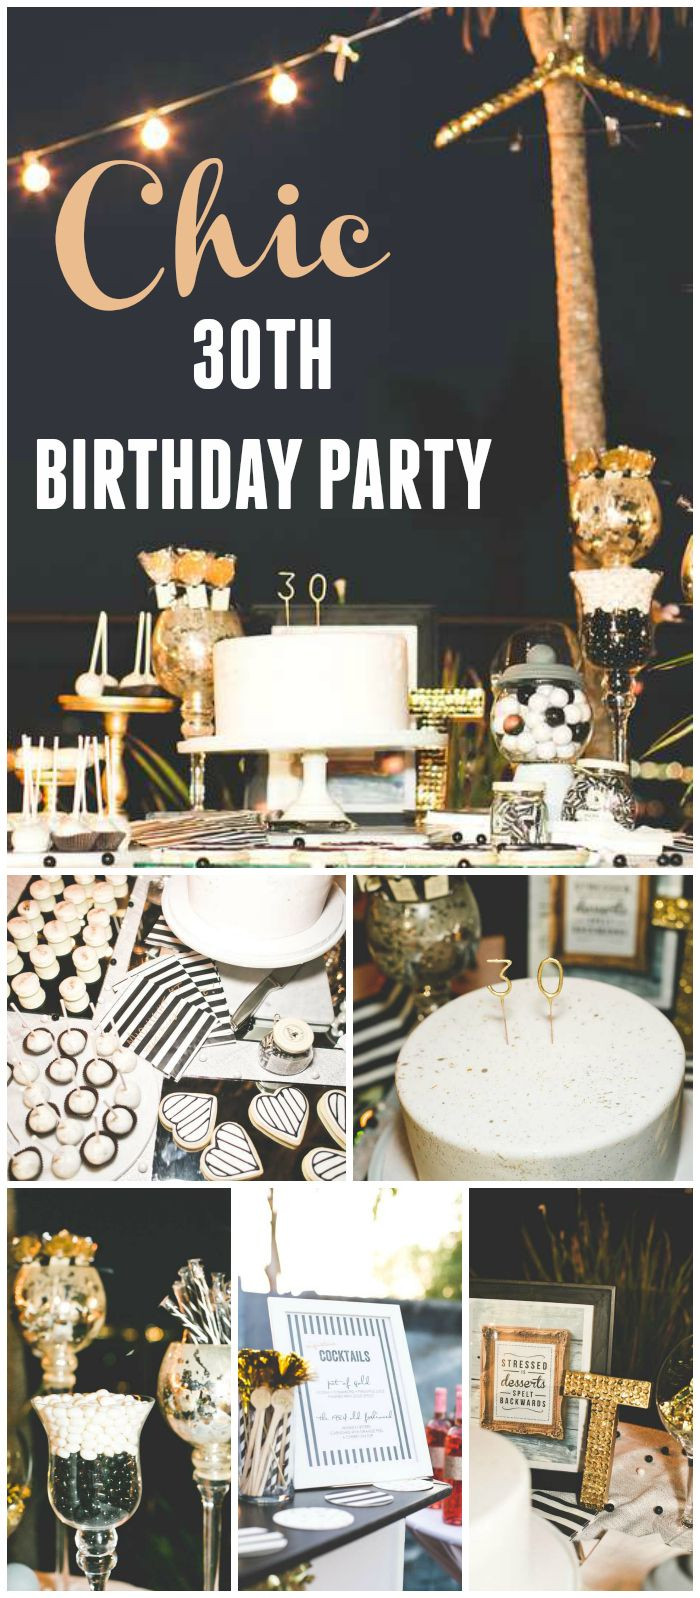 Ideas For 30Th Birthday Party
 A 30th birthday cocktail event decorated in black & white